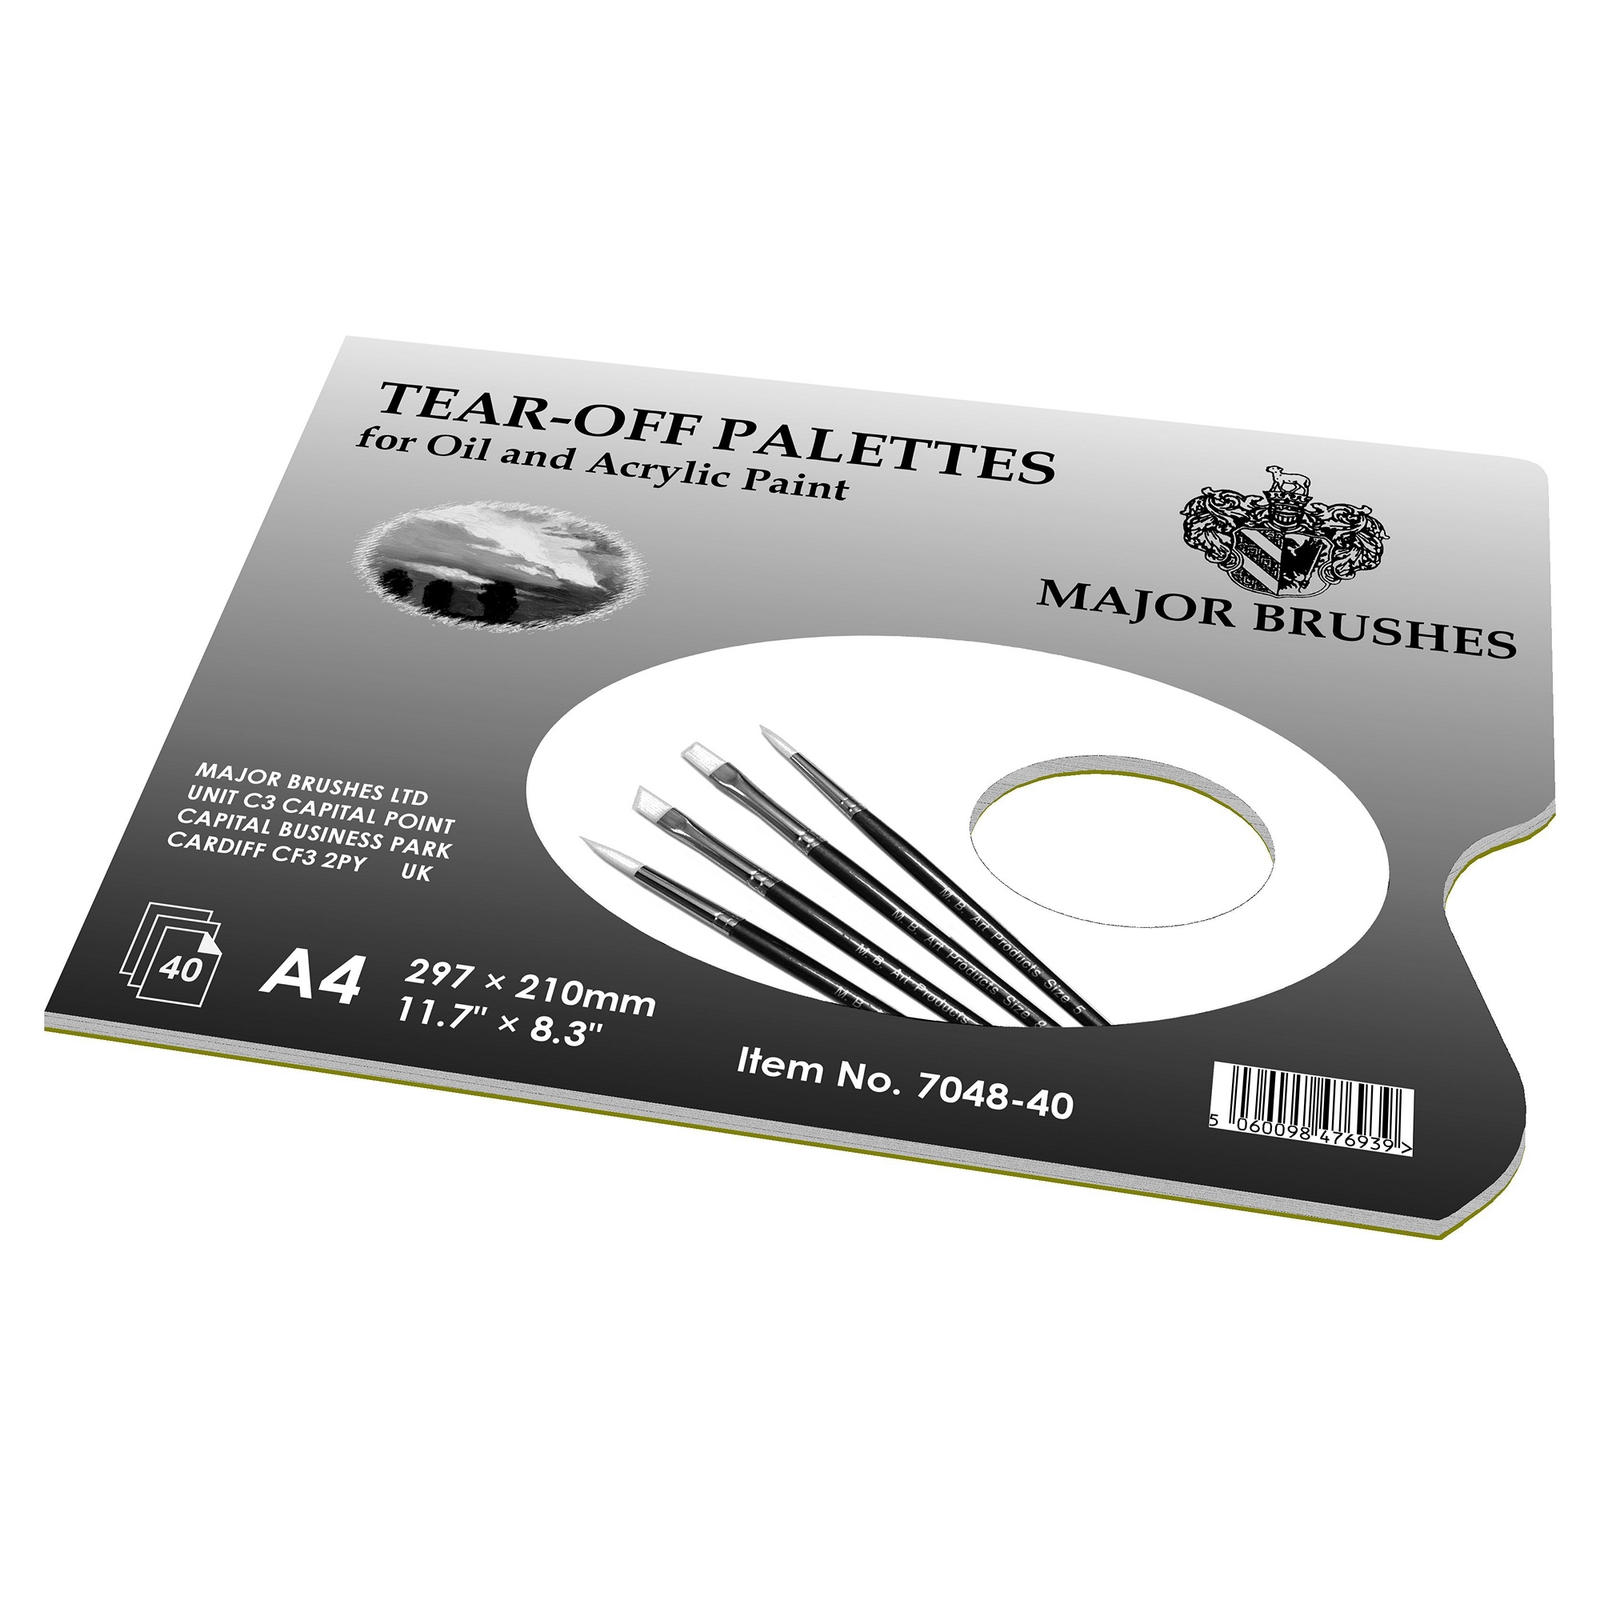 Tear-off Palettes A4 Pack x40